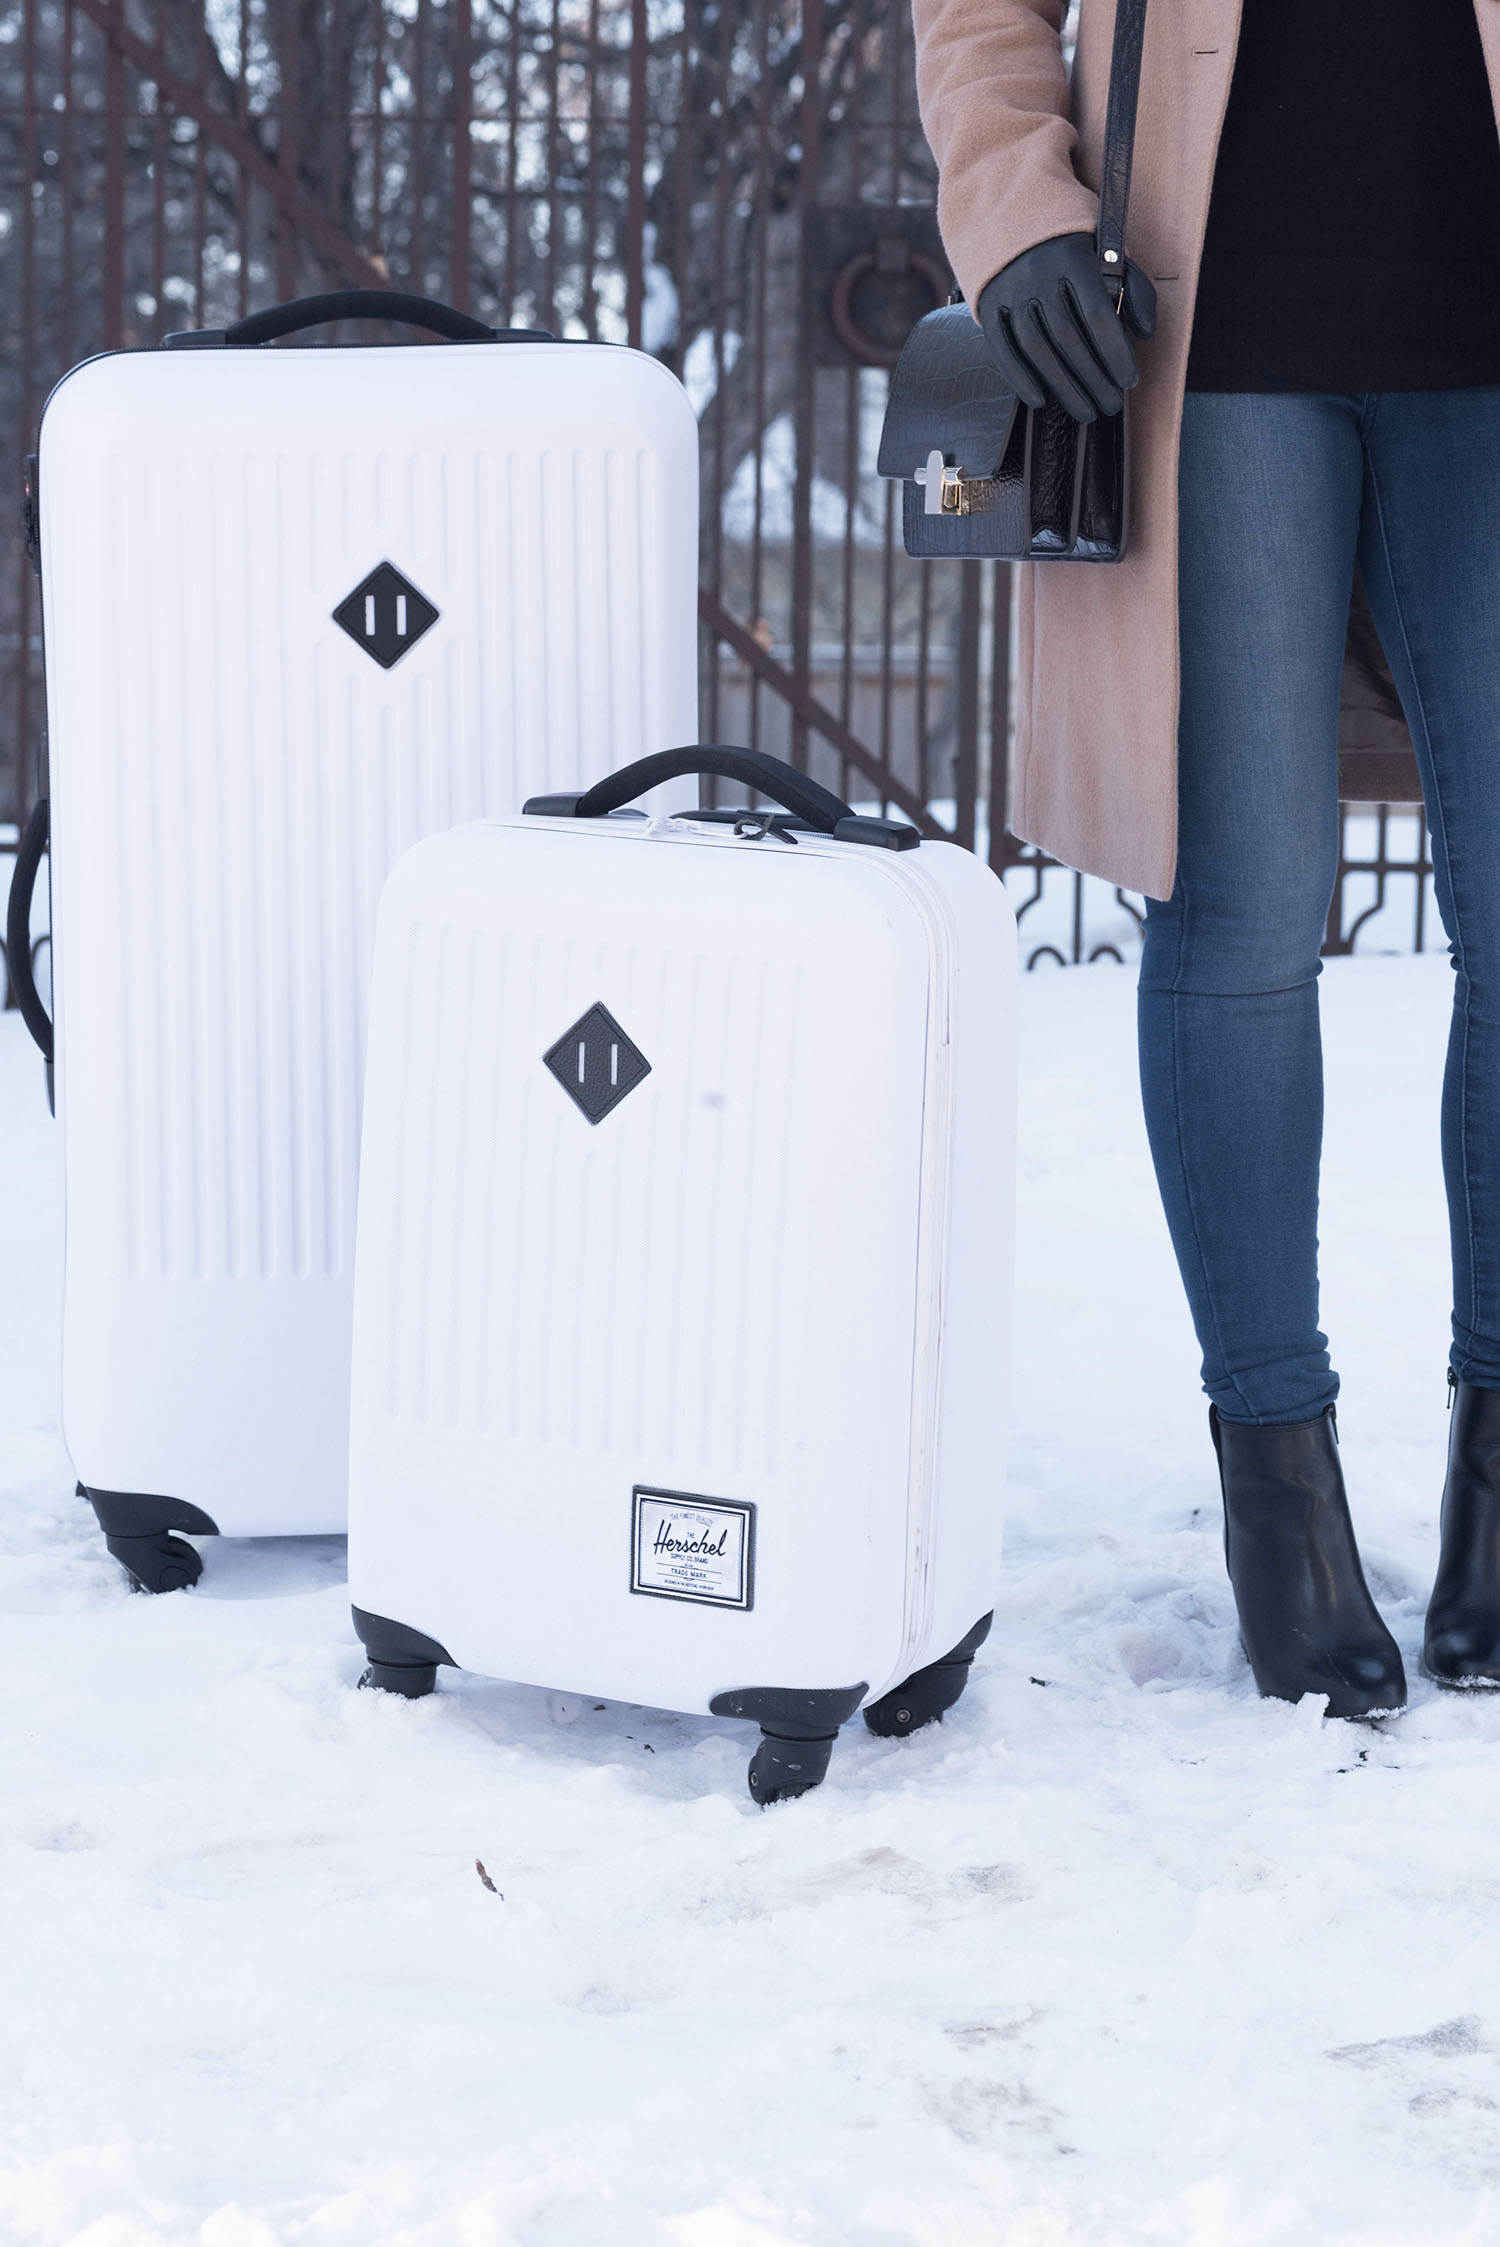 Outfit details on Canadian fashion blogger Cee Fardoe of Coco & Vera, including two white Herschel Supply Co. suitcases, Aldo boots and Mott & Bow jeans